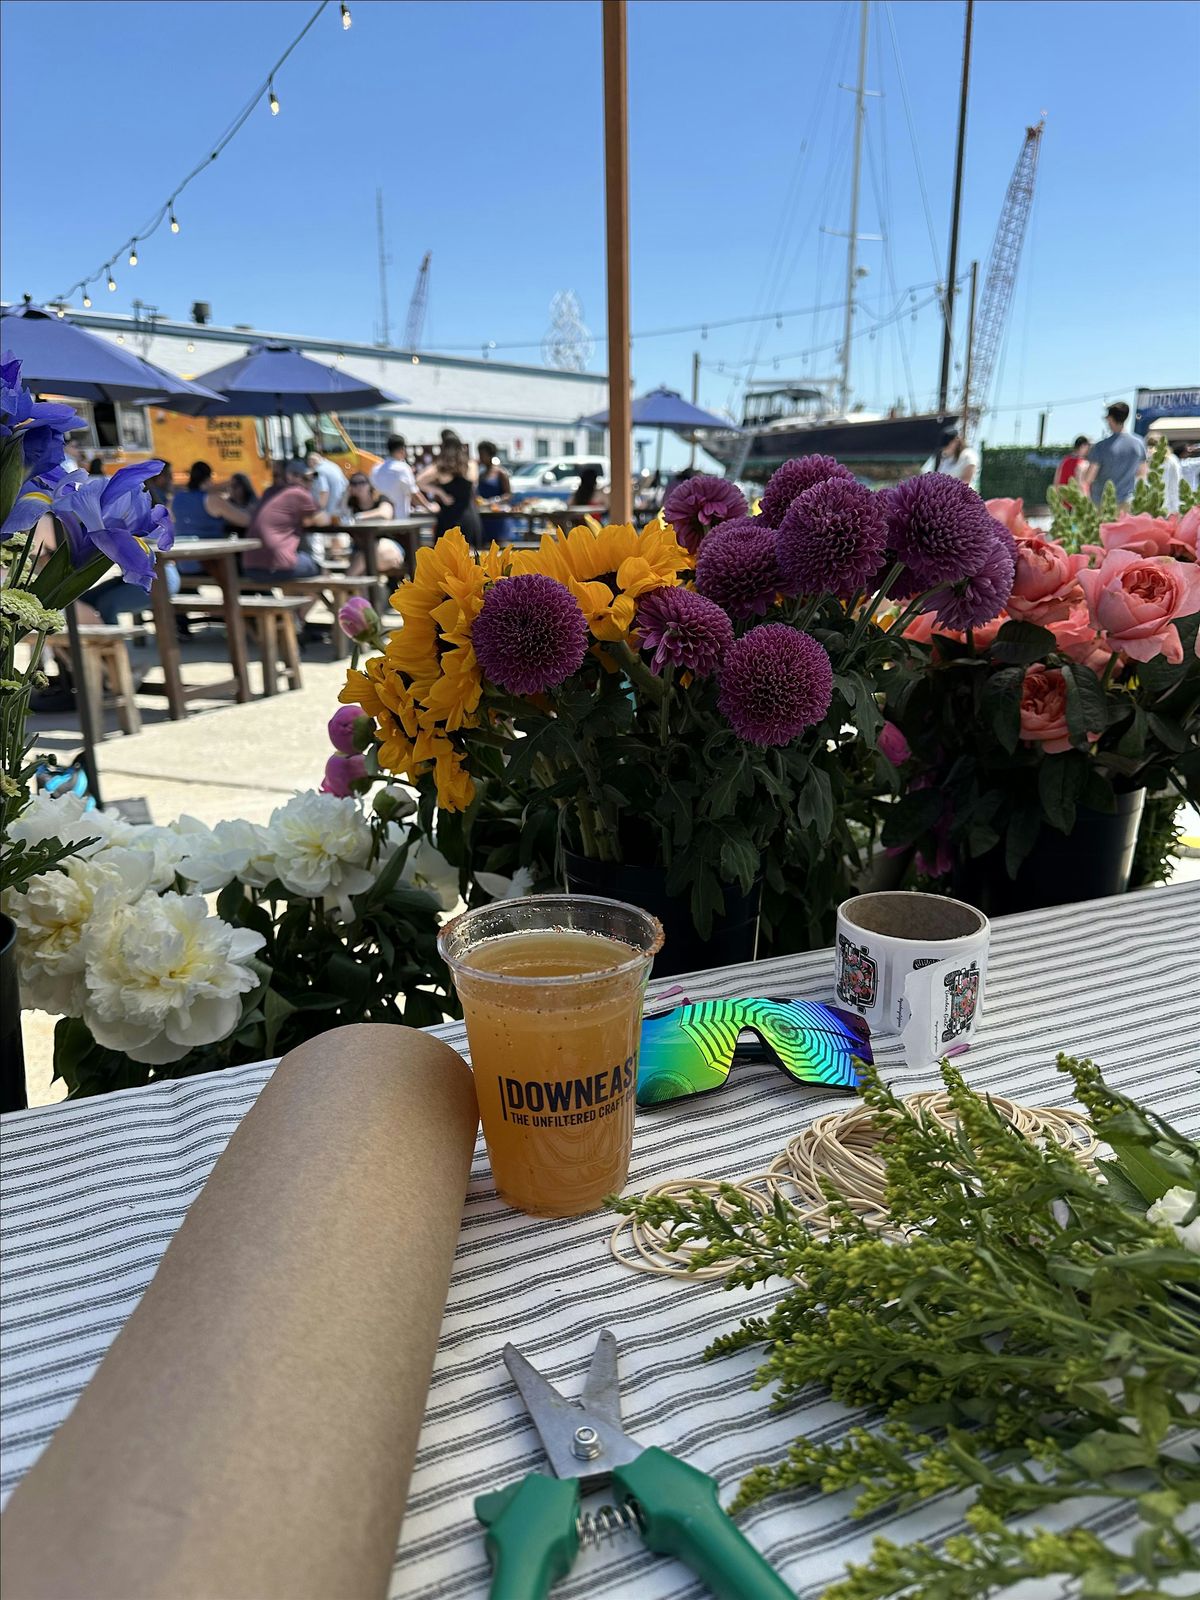 Summer Sip & Stem by Garden Gate Farms with Downeast Cider